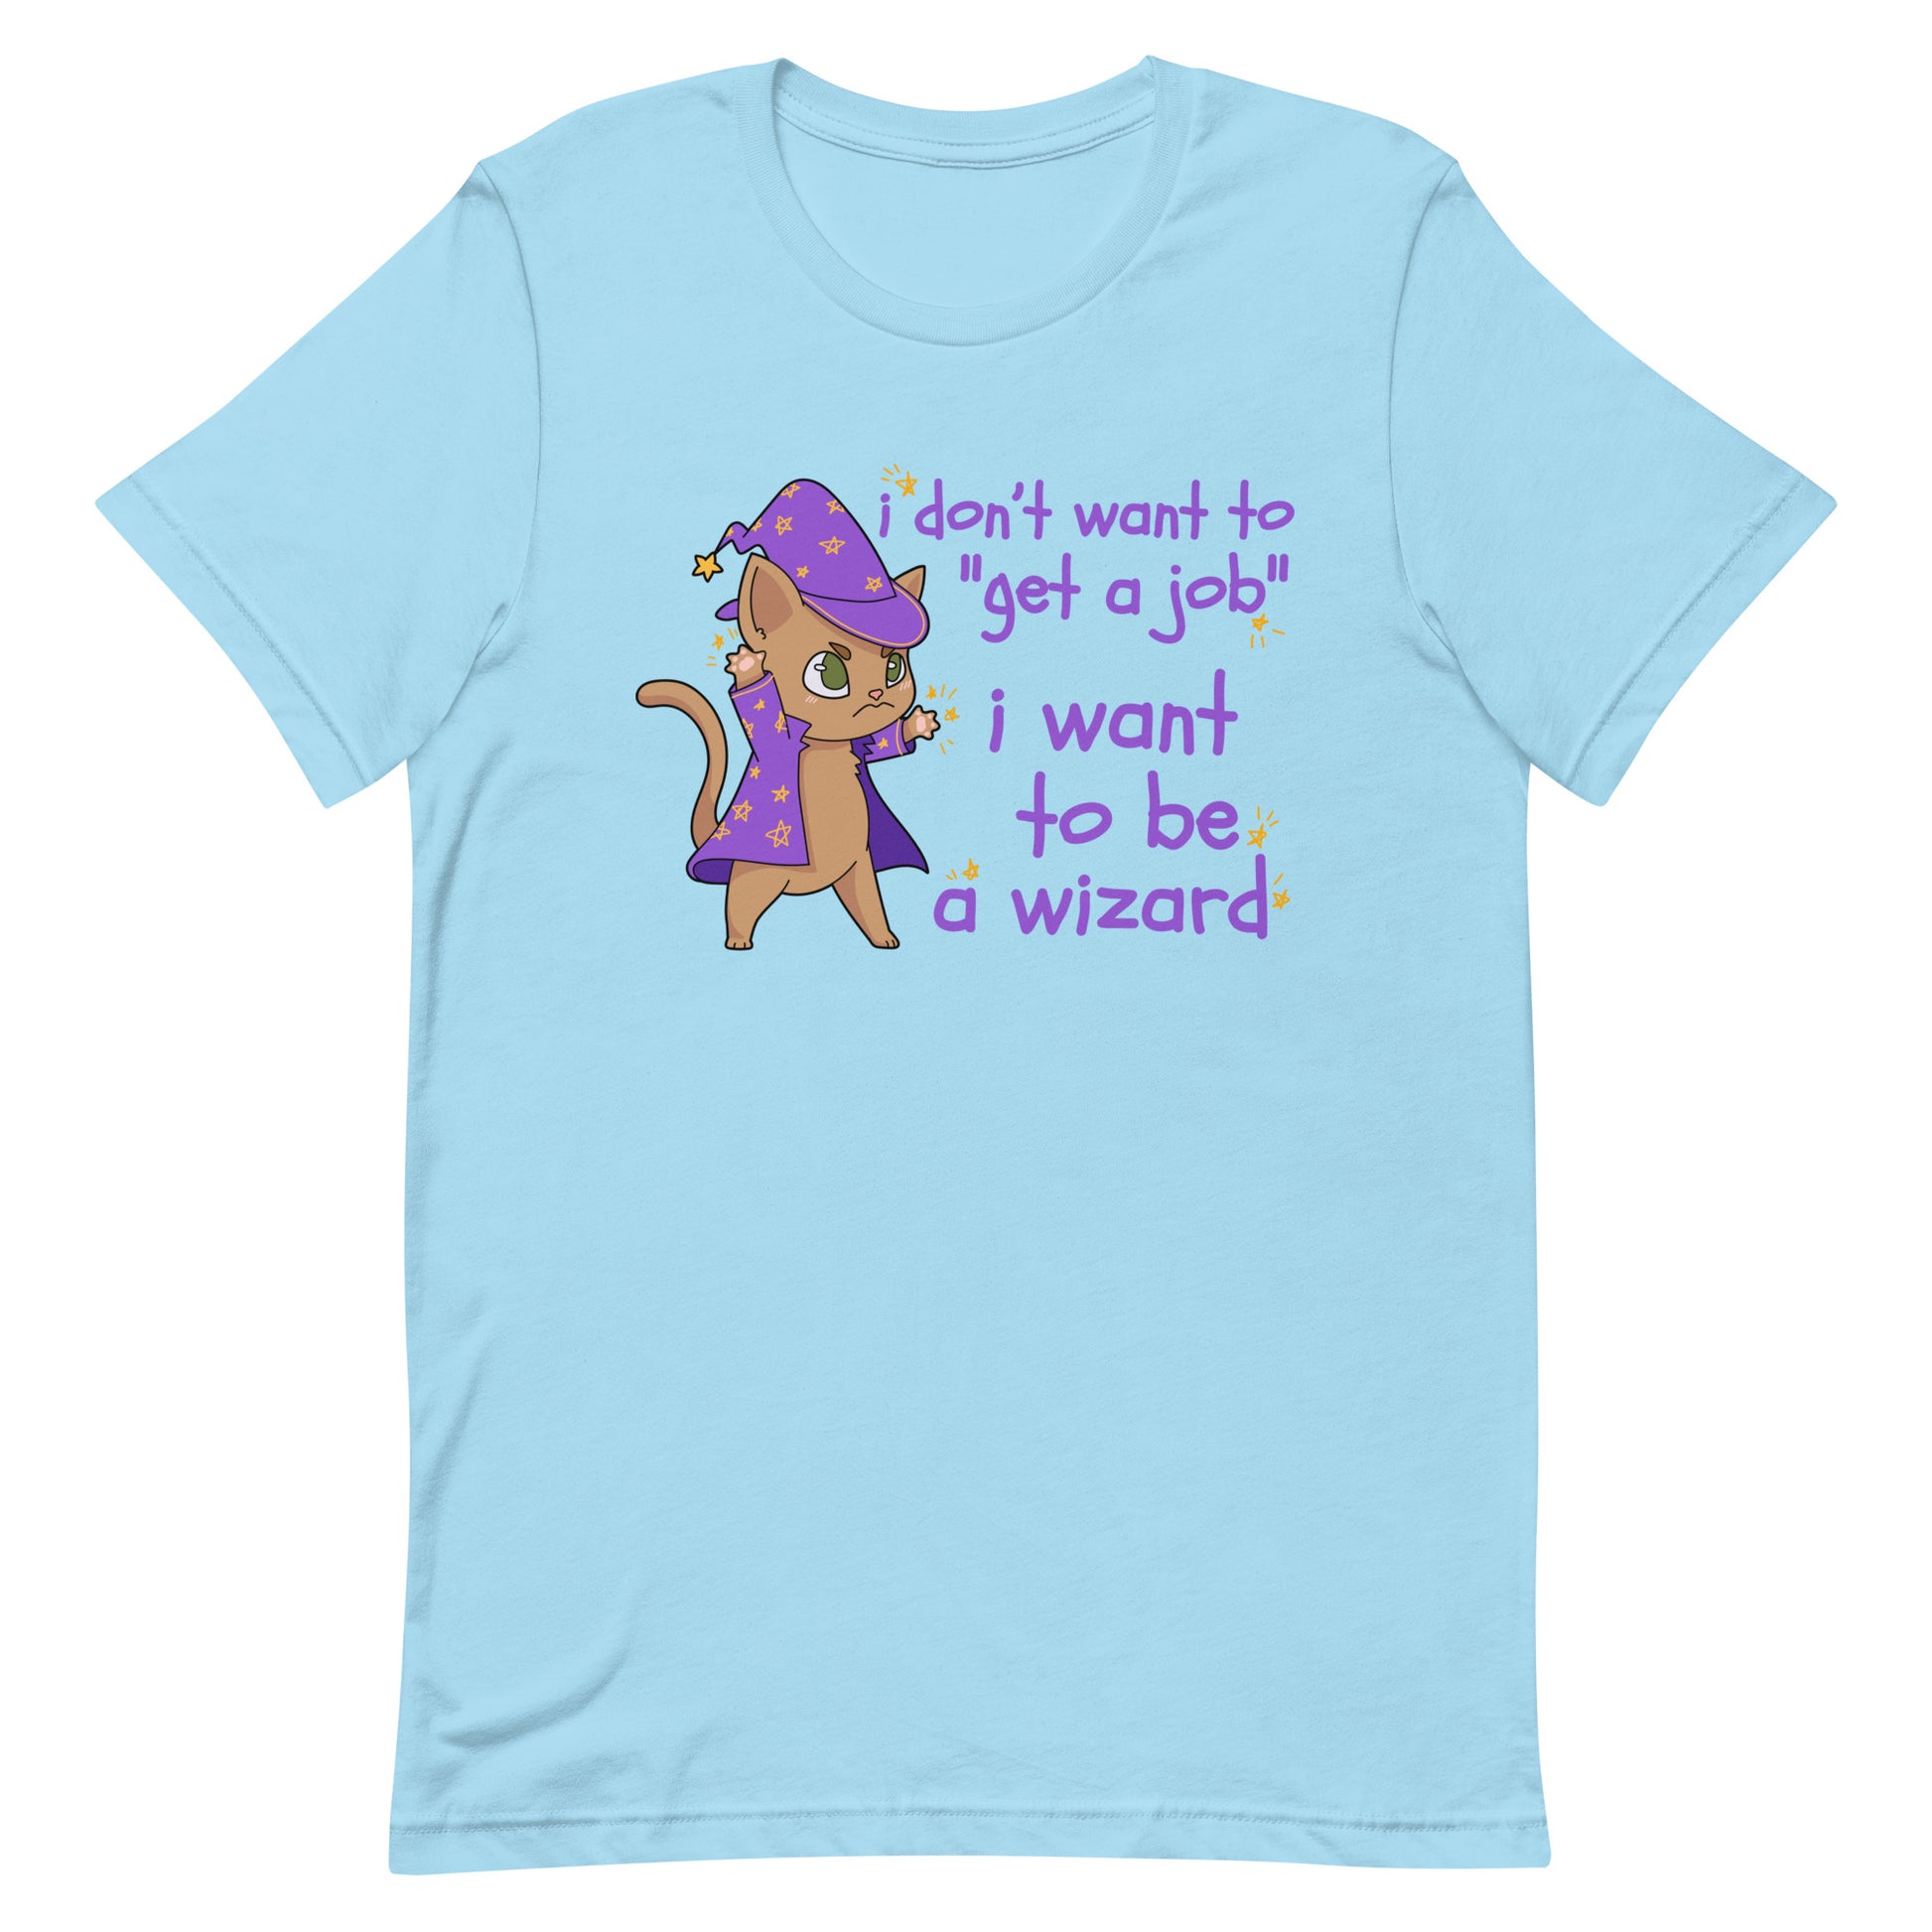 A light blue t-shirt featuring an illustration of a small brown cat wearing a wizard's hat and robes. Scribbly text next to the cat reads "i don't want to "get a job". i want to be a wizard".